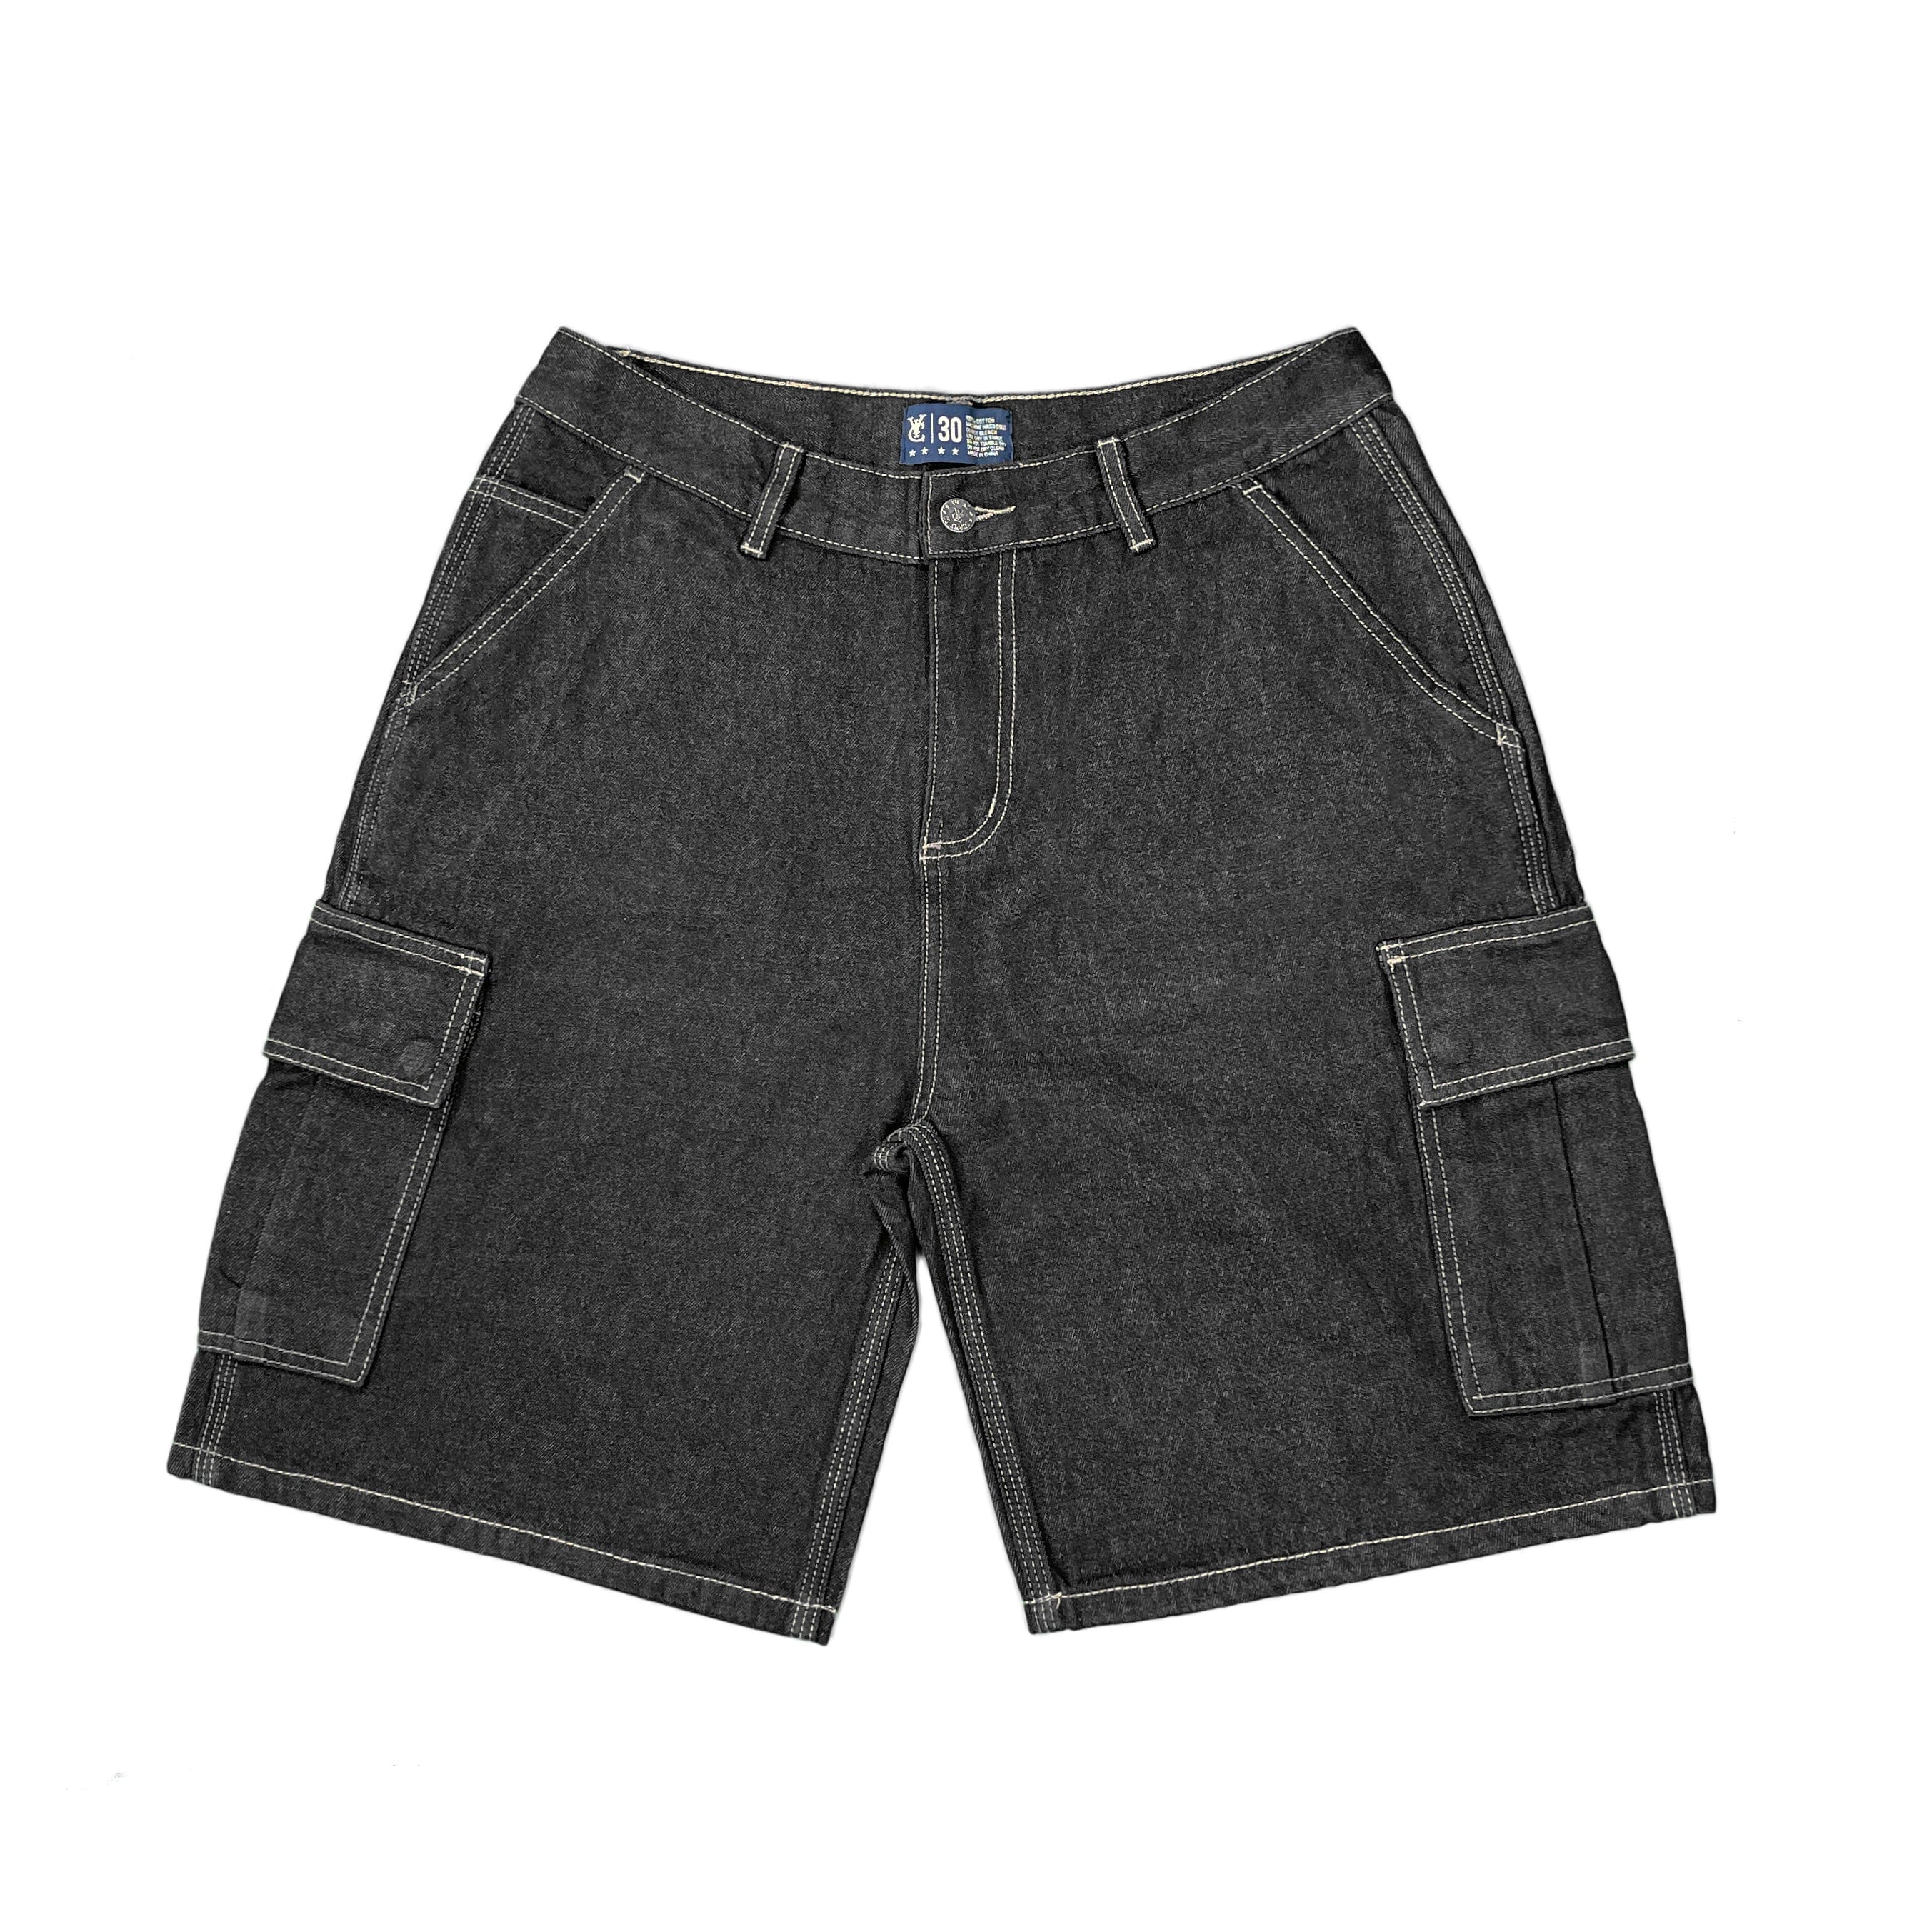 Premium quality cargo denim jean shorts by New Zealand skate and streetwear clothing label VIC Apparel. Loose fit. Featuring utility pockets and triple needle contrast stitching with VIC label flag at the back right pocket. Classic vintage workwear jorts style.